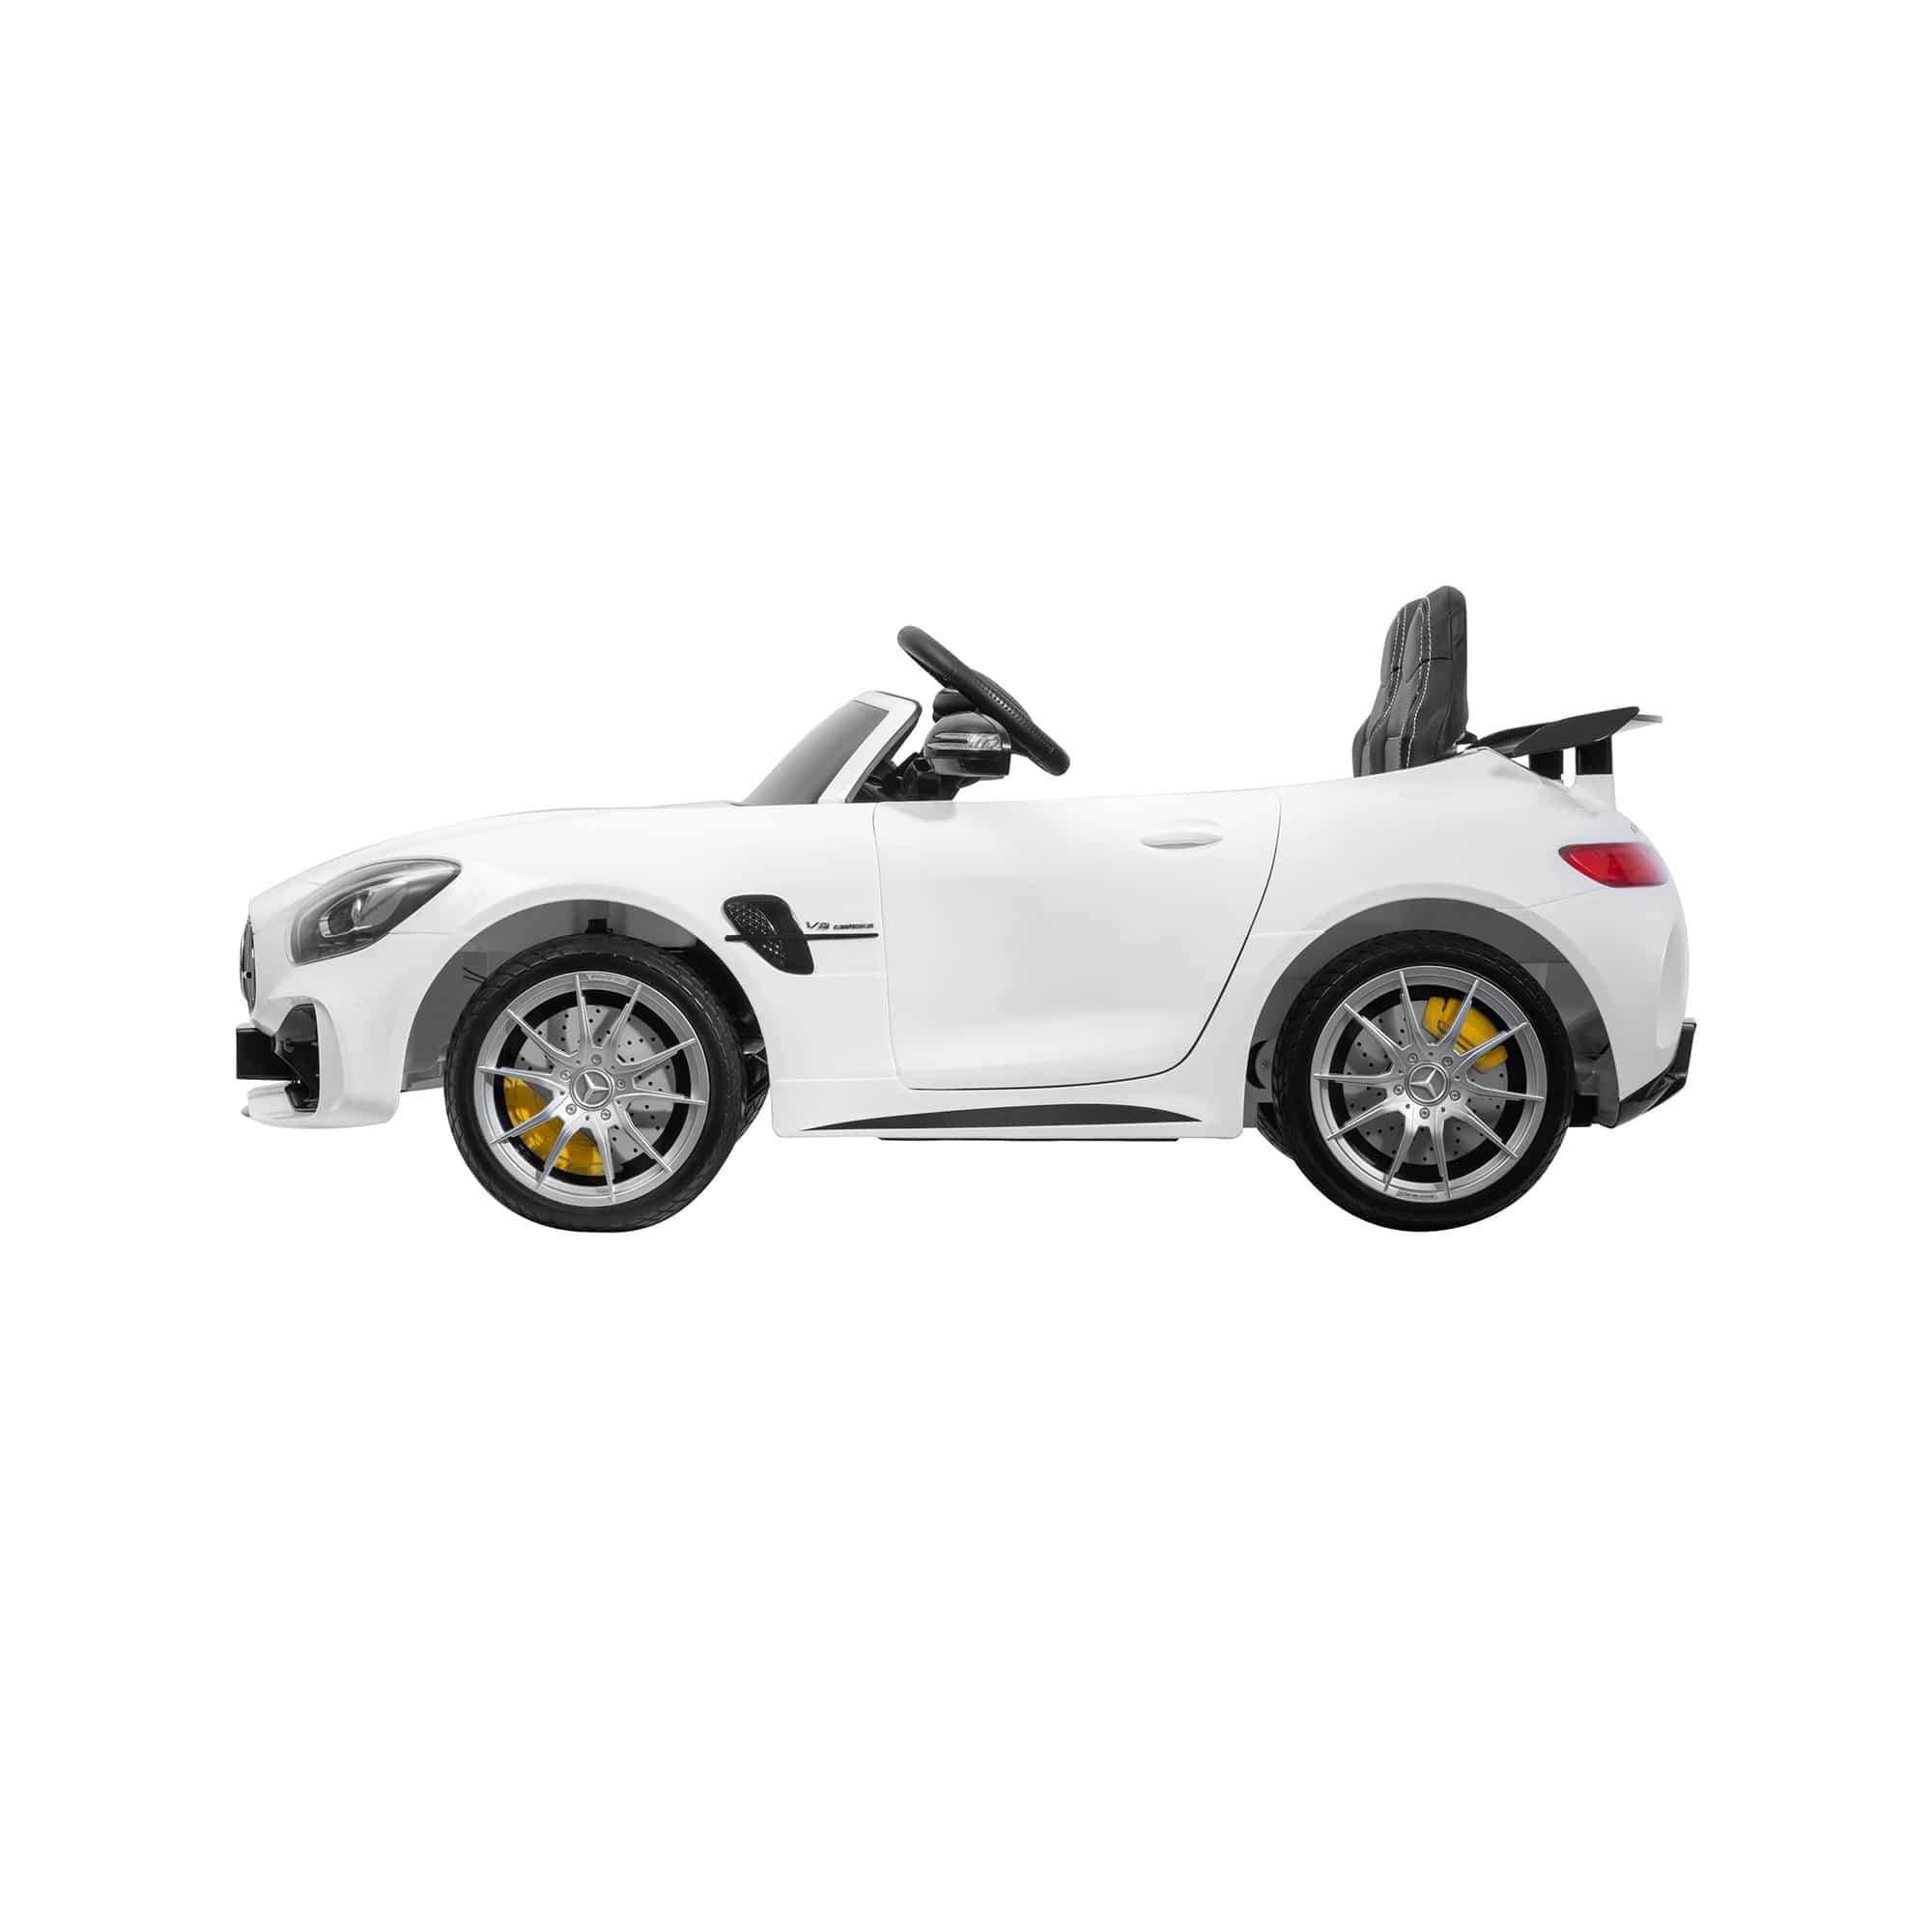 Licensed Mercedes Benz GTR AMG 12V Battery Operated 2 Seater Ride On Car With Parental Remote by Freddo